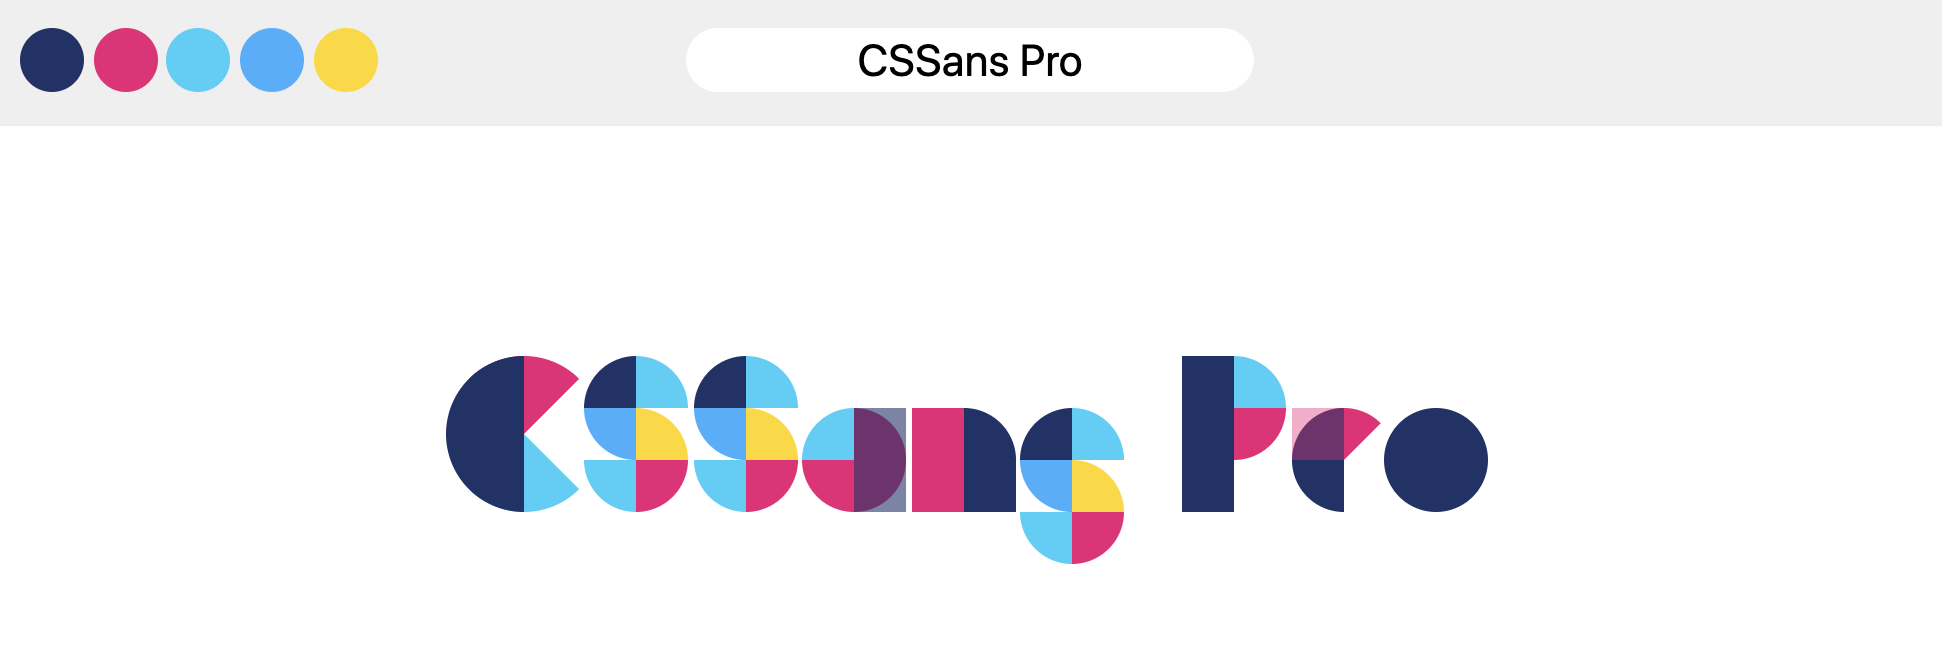 Output of using CSSans Pro, geographic shapes in multiple colors combined to make letterforms.